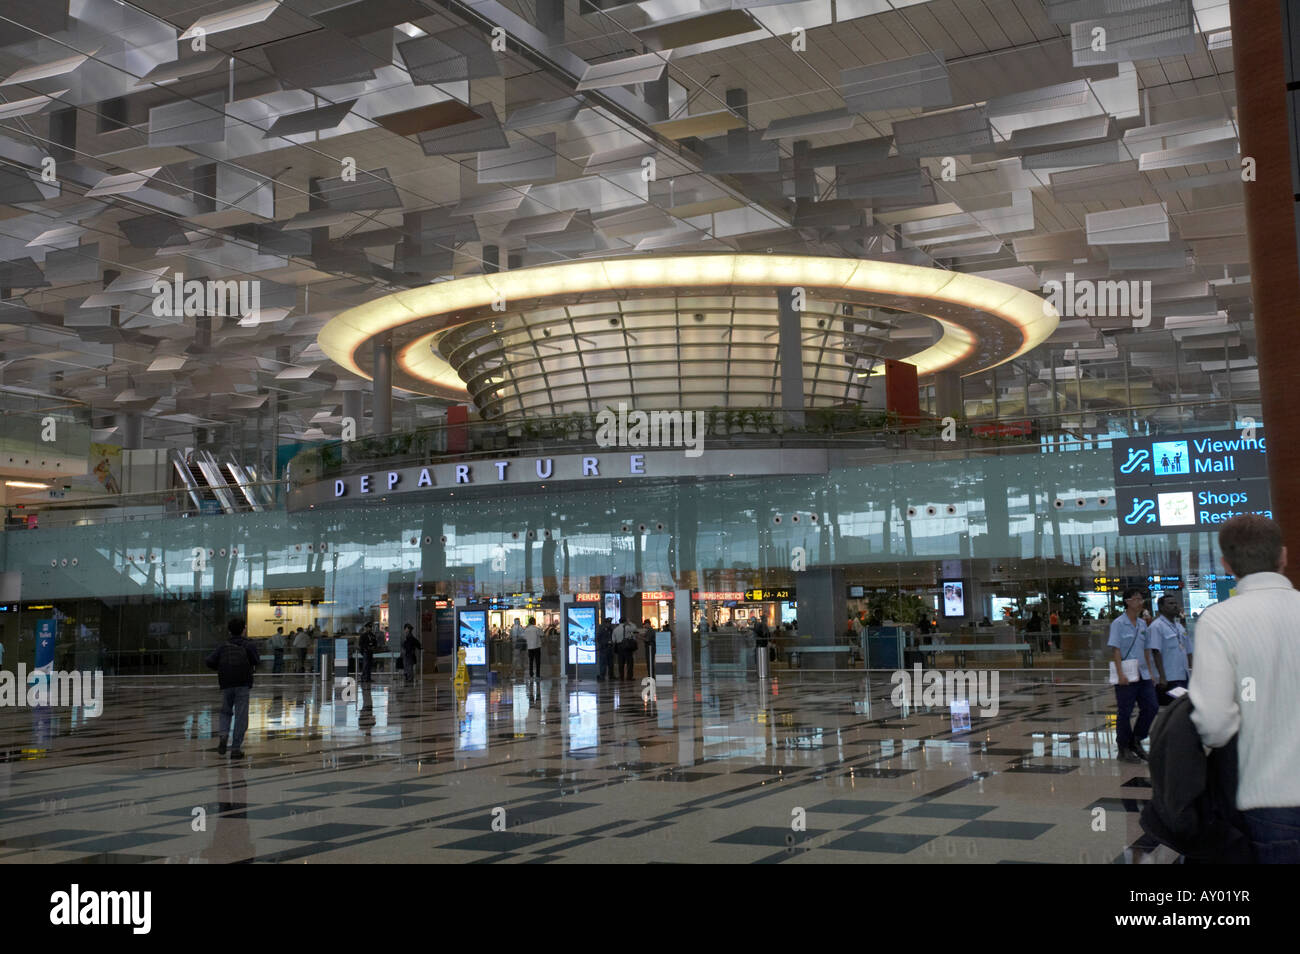 Terminal 3 - Singapore Changi Airport, Construction of this…